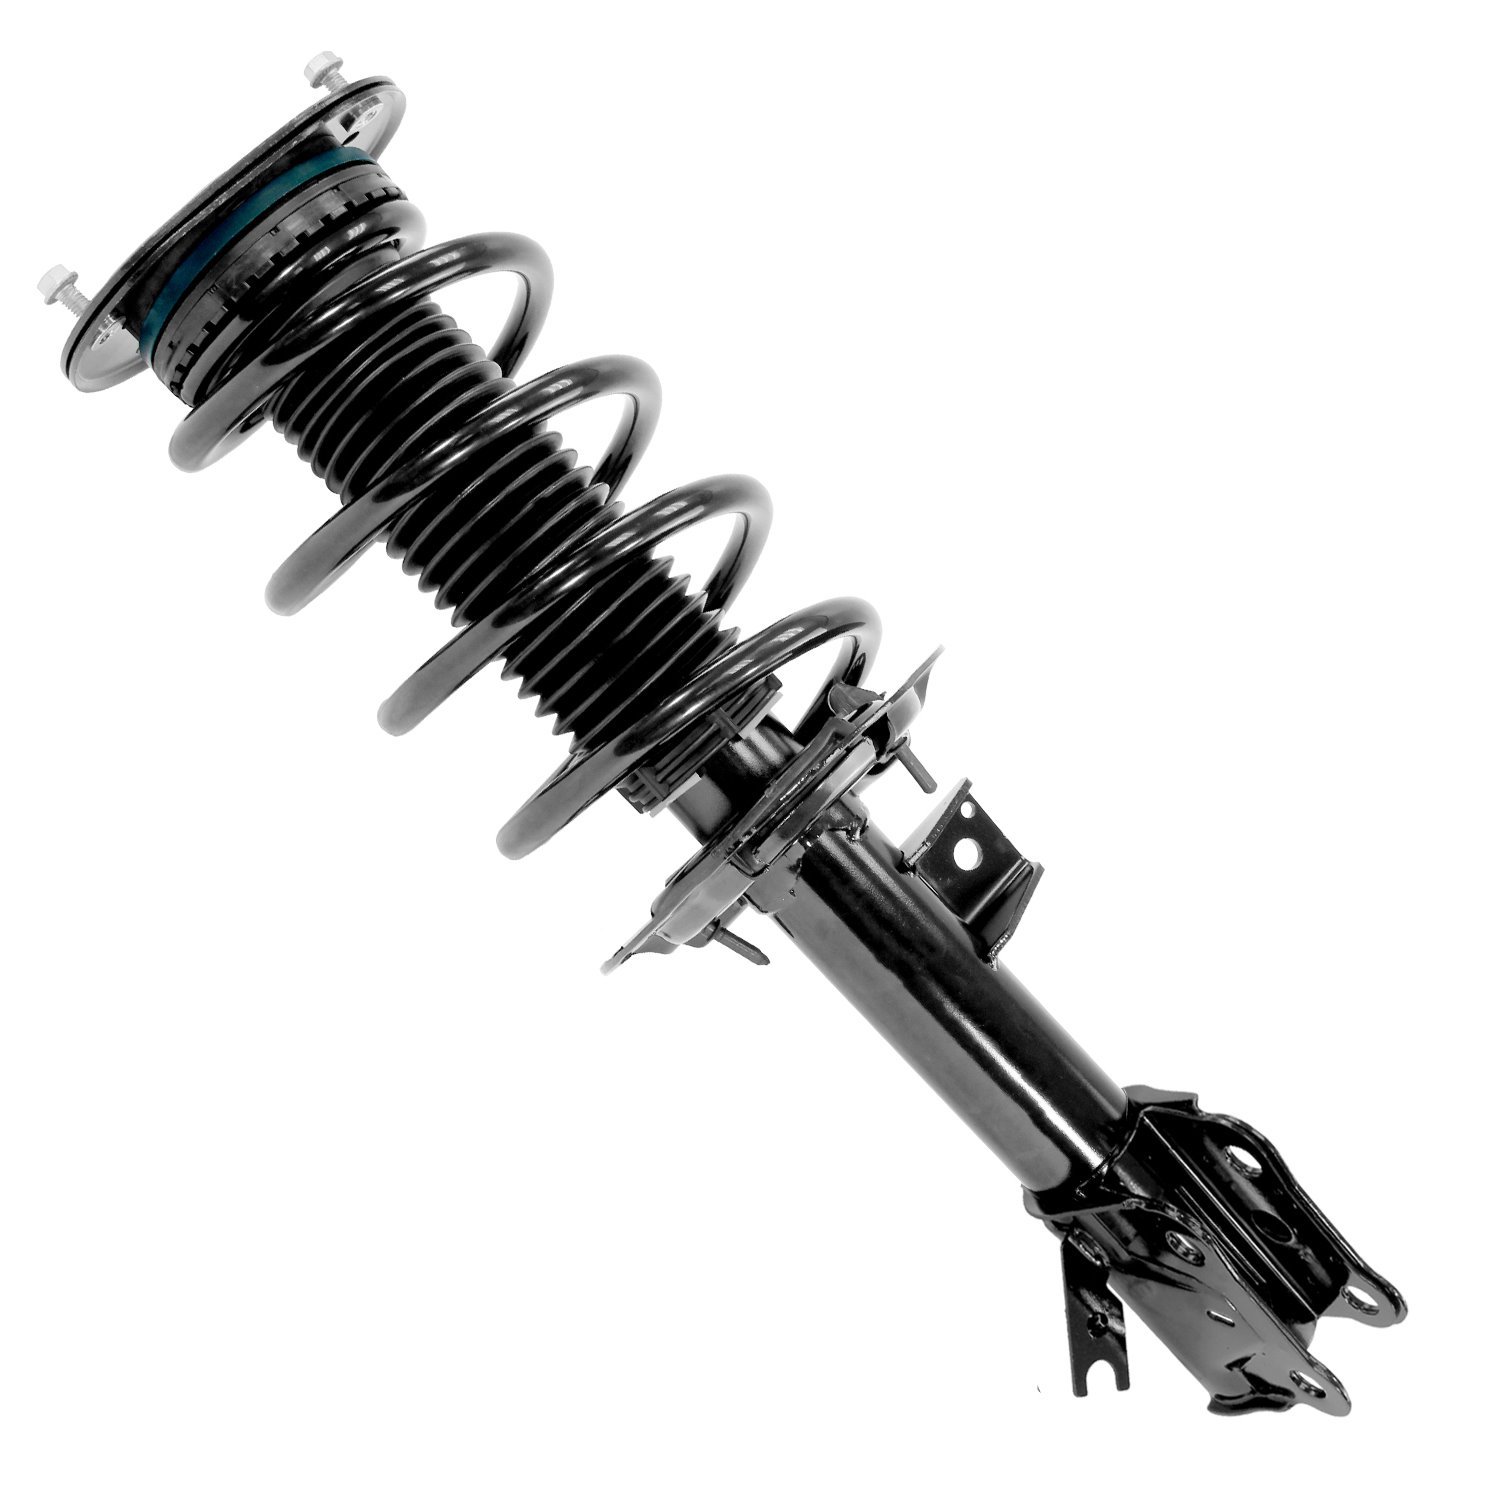 13521 Front Suspension Strut & Coil Spring Assemby Fits Select Ford Edge, Lincoln Nautilus, Lincoln MKX